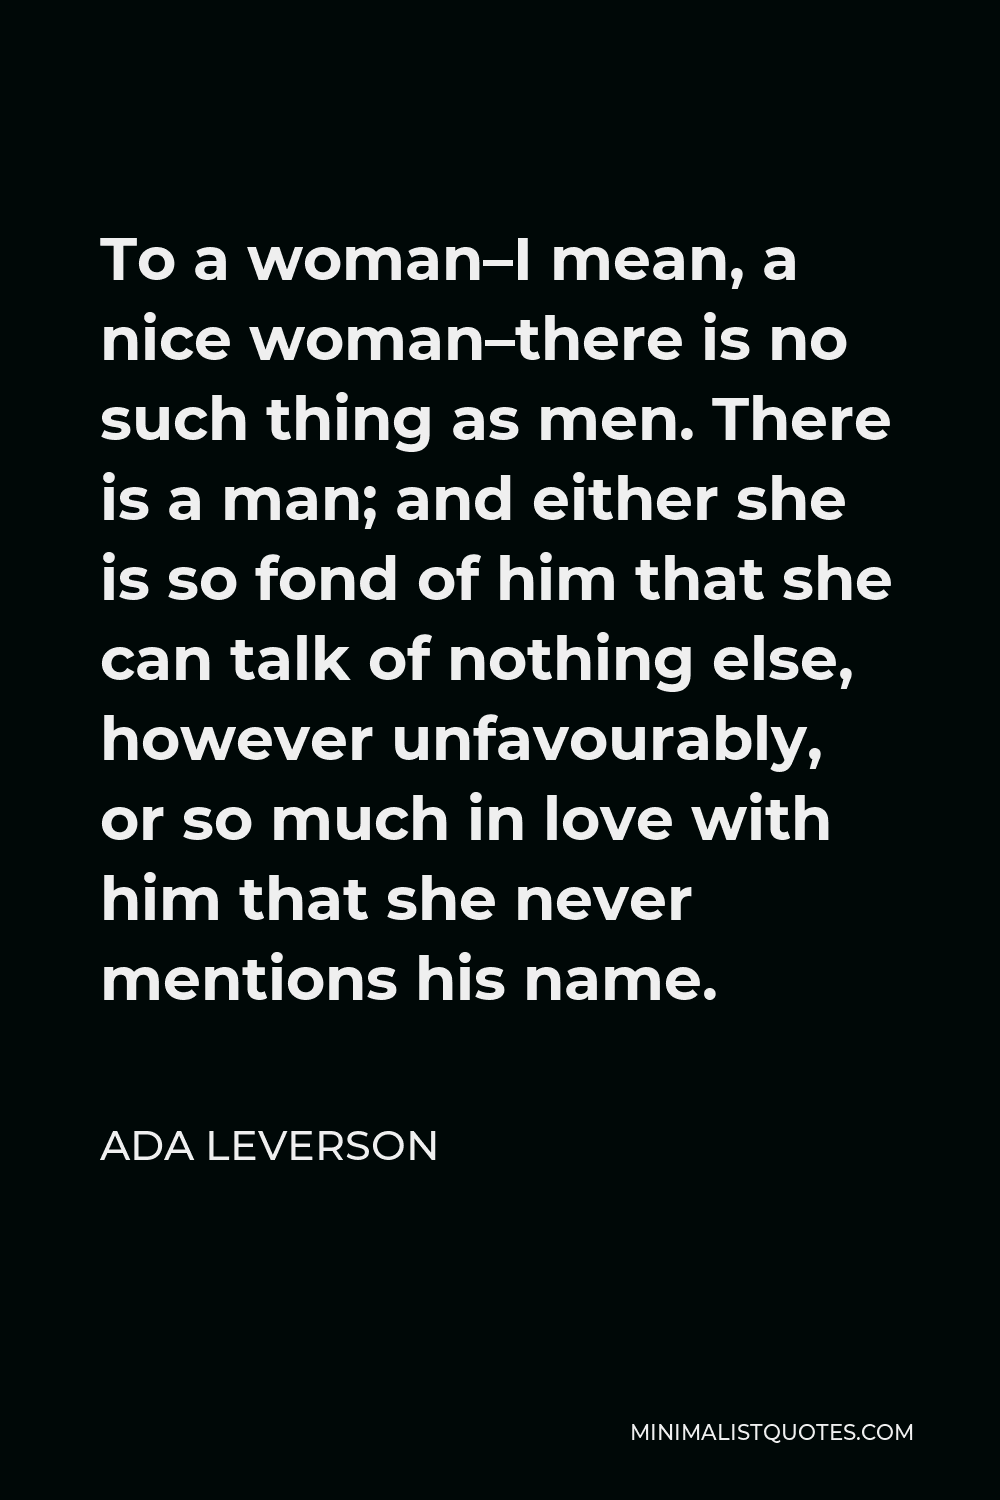 Ada Leverson Quote - To a woman–I mean, a nice woman–there is no such thing as men. There is a man; and either she is so fond of him that she can talk of nothing else, however unfavourably, or so much in love with him that she never mentions his name.